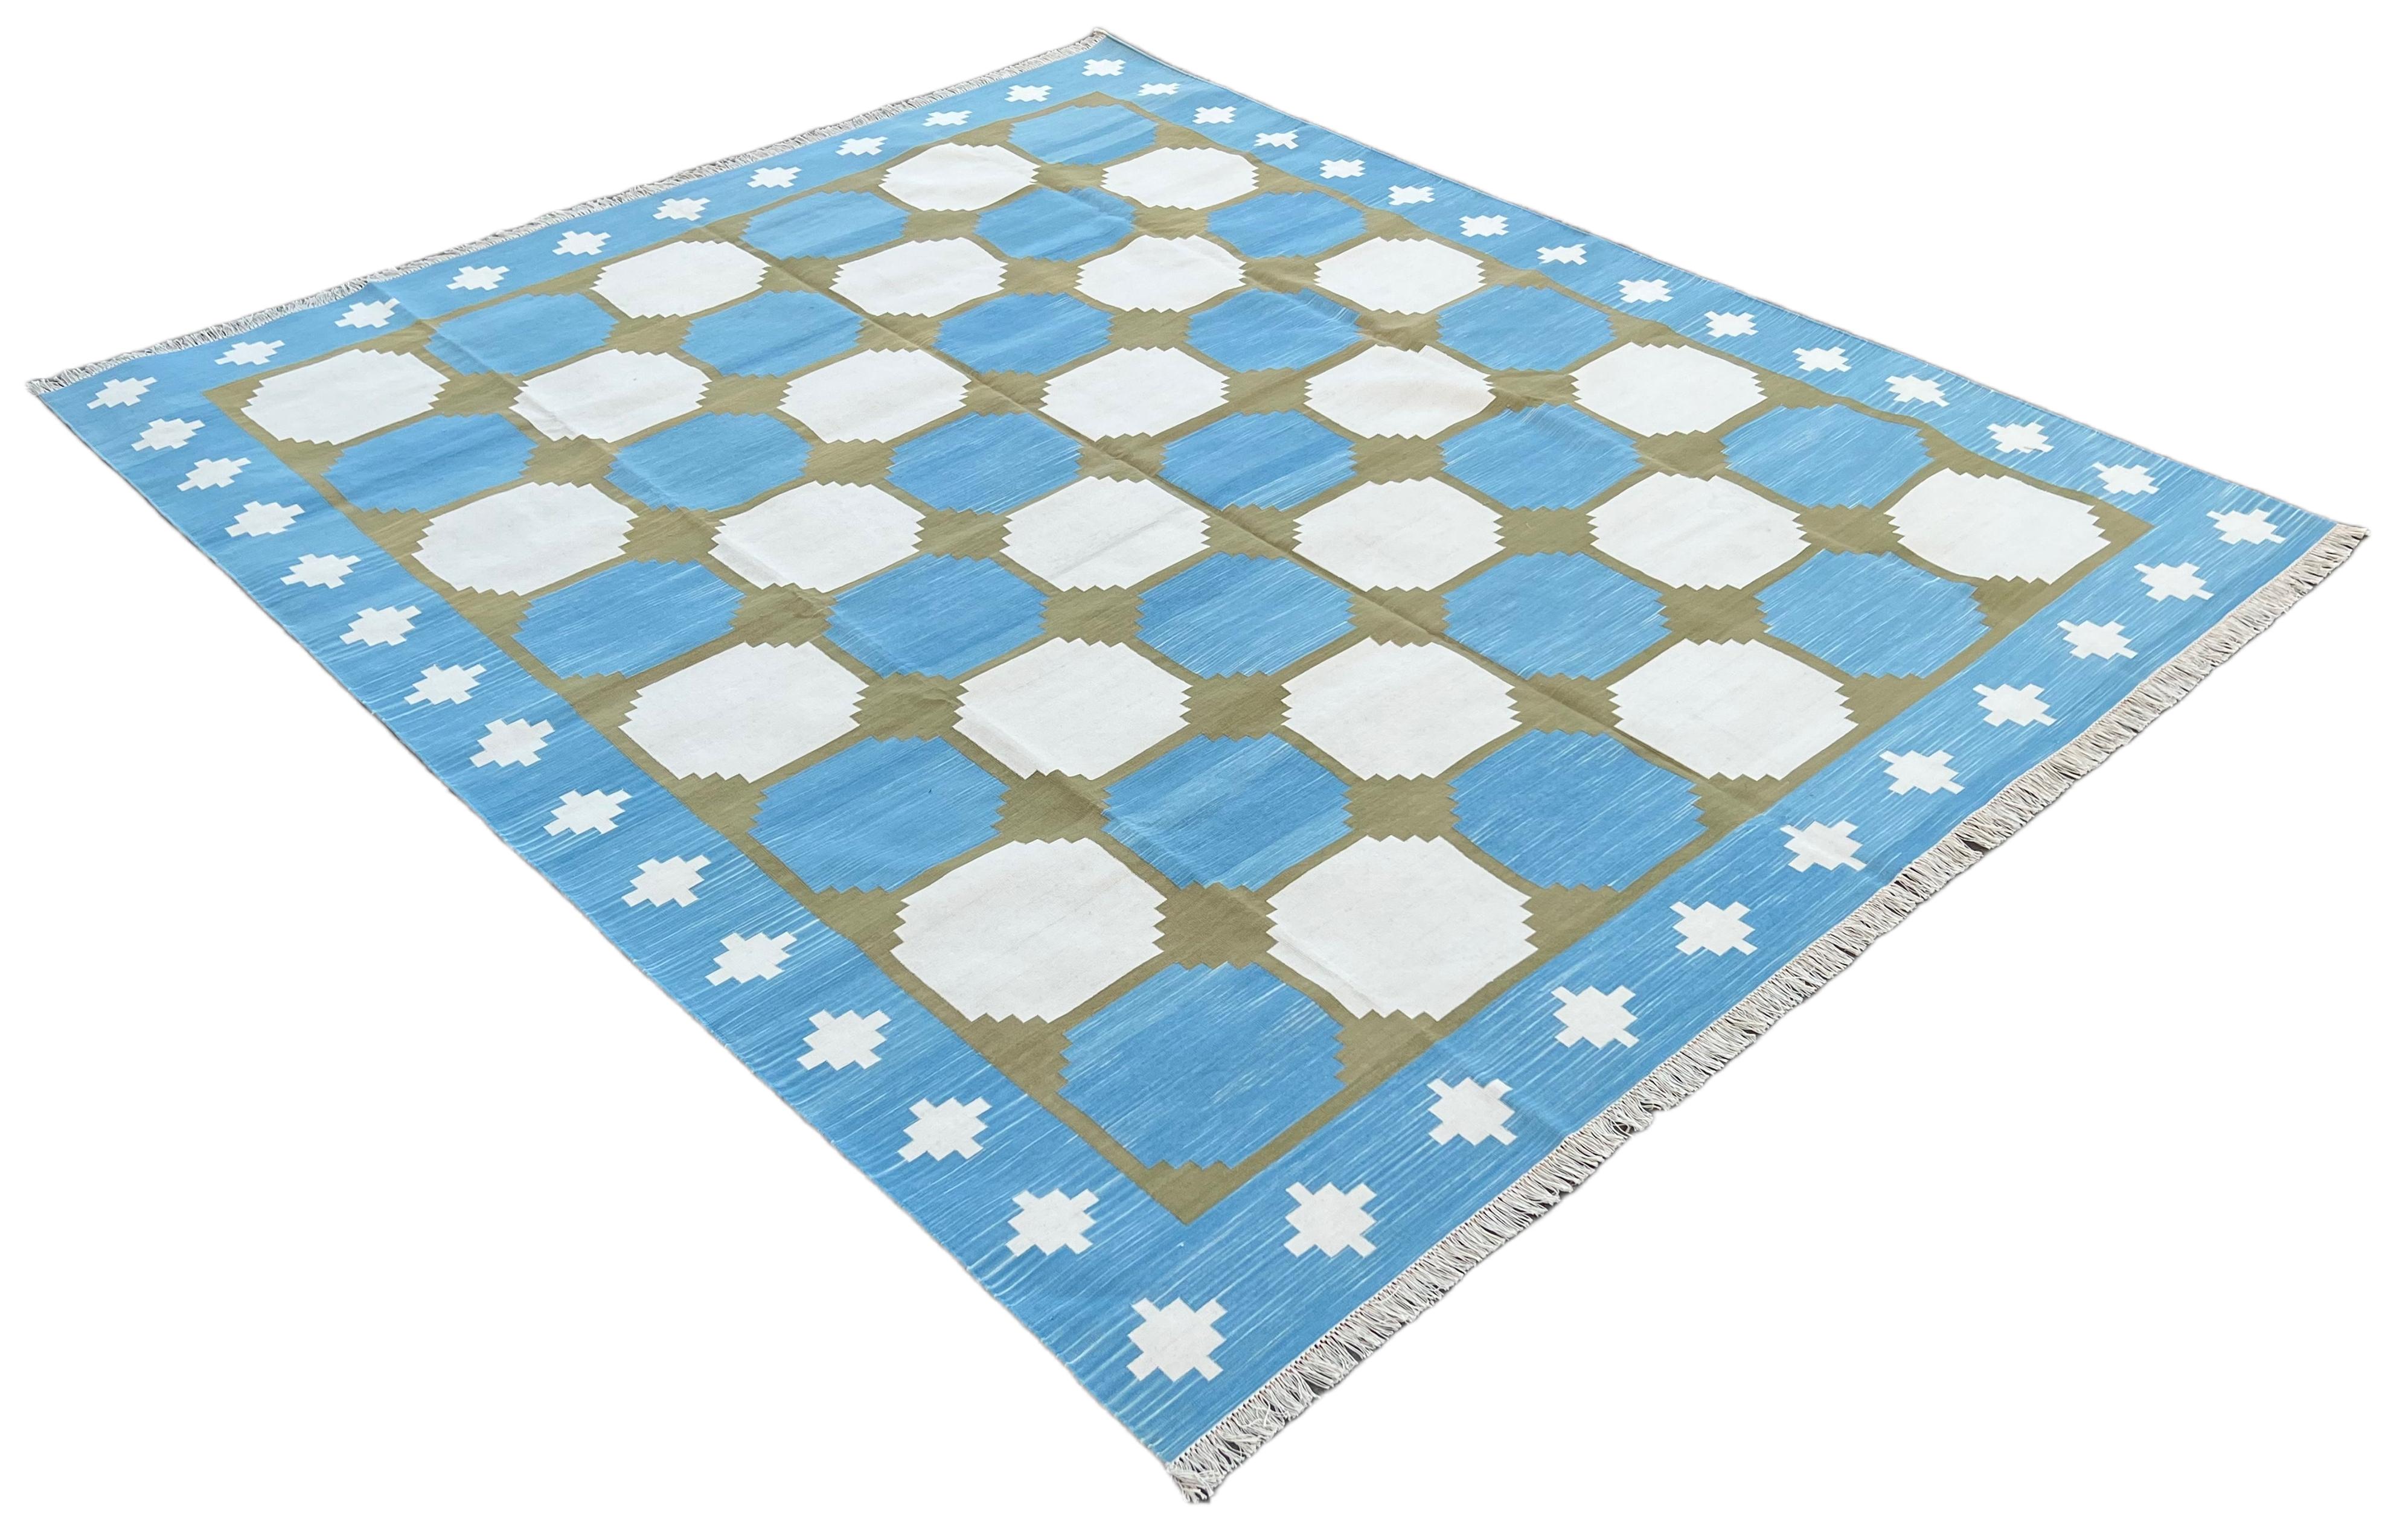 Cotton Vegetable Dyed Sky Blue, Cream And Olive Green Tile Pattern Indian Dhurrie Rug-8'x10' 
These special flat-weave dhurries are hand-woven with 15 ply 100% cotton yarn. Due to the special manufacturing techniques used to create our rugs, the